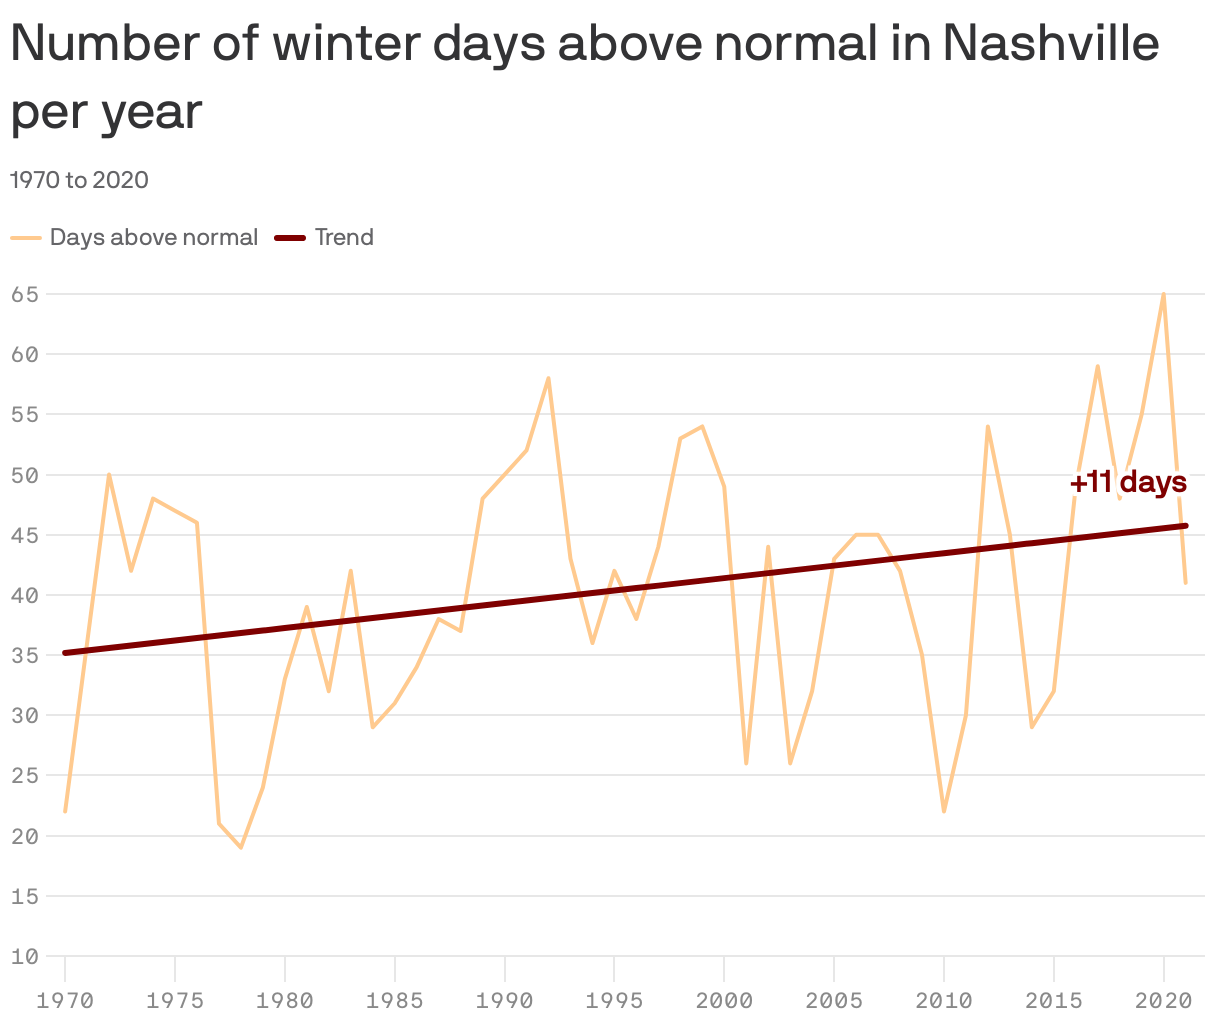 Number of winter days above normal in Nashville per year